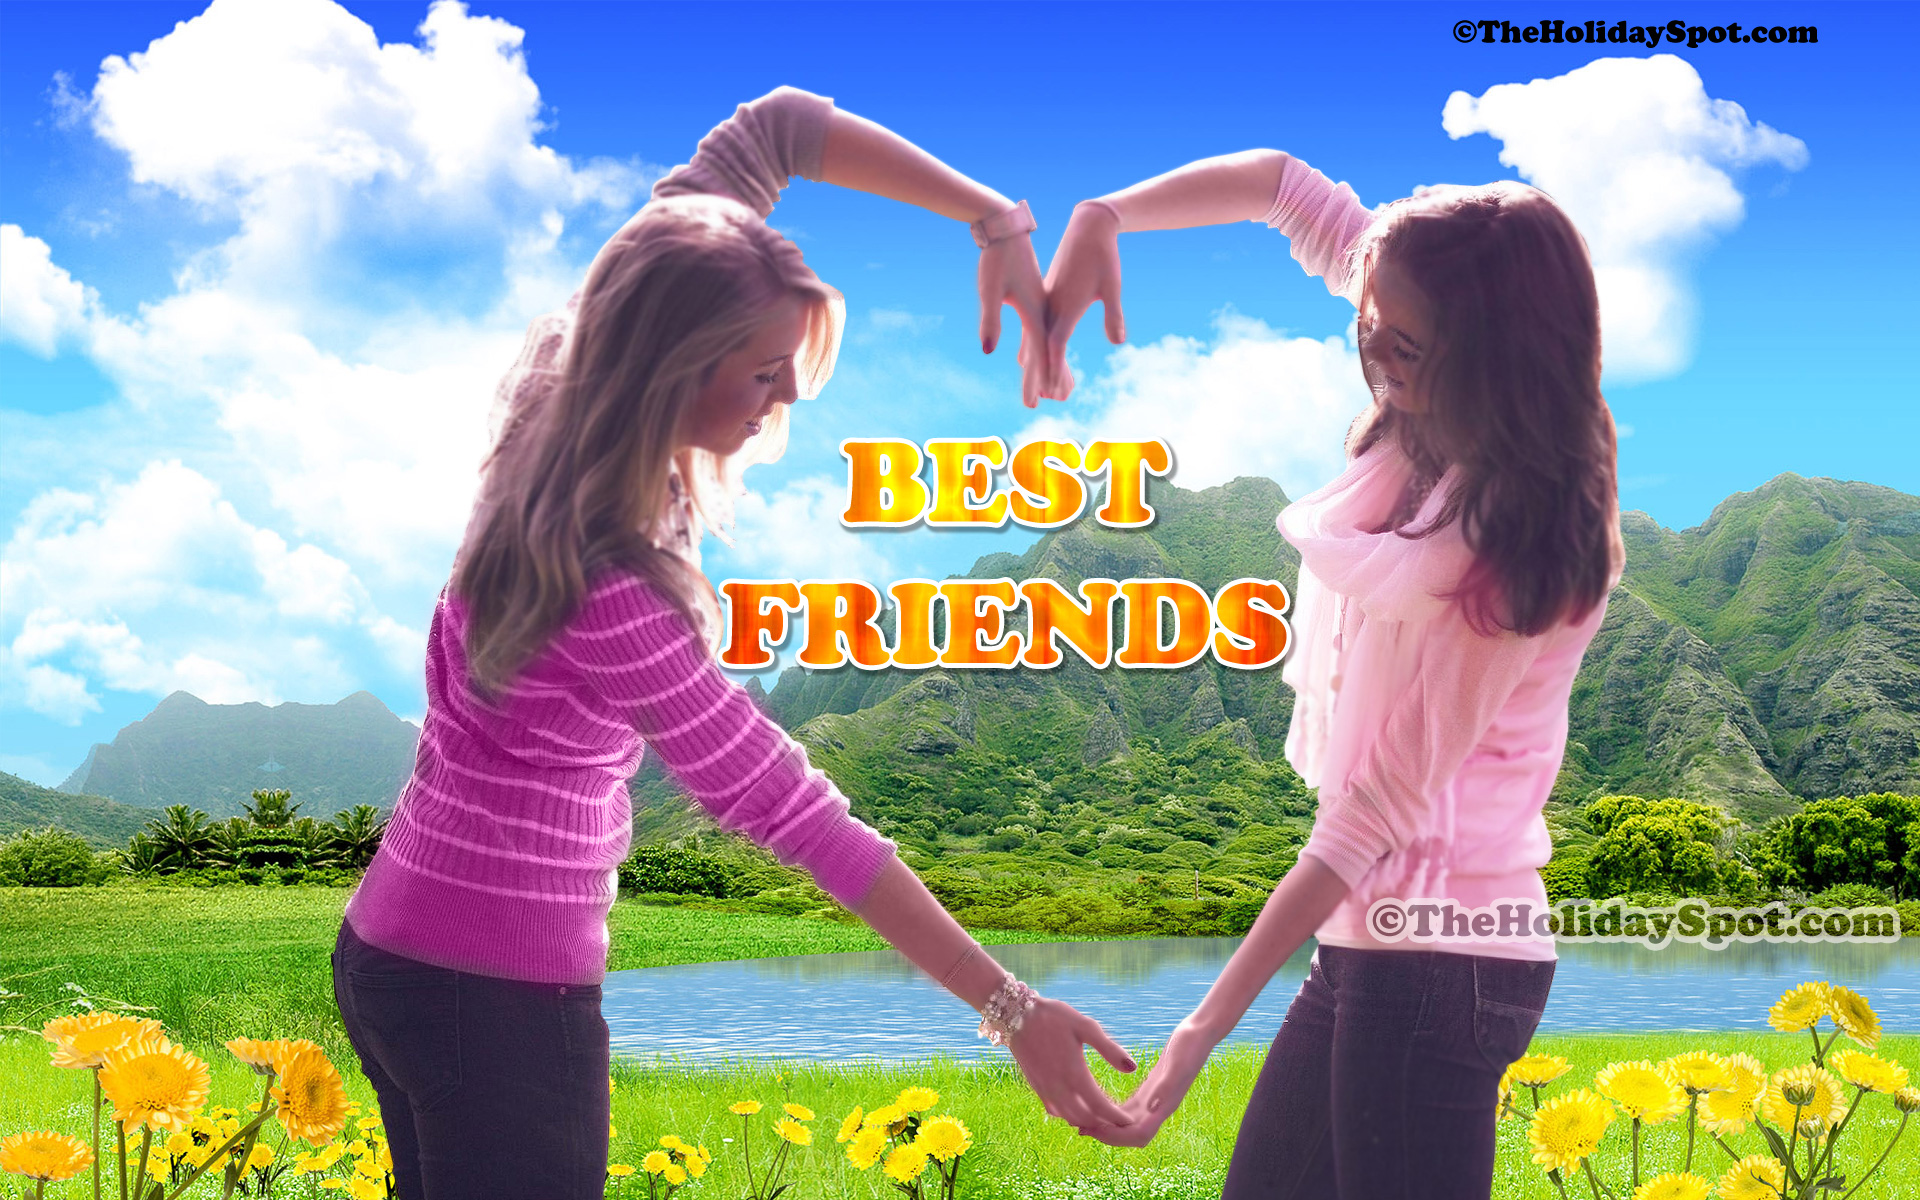 🔥 Download High Quality Wallpaper On Friendship Featuring Two Friend Sharing By Ataylor67